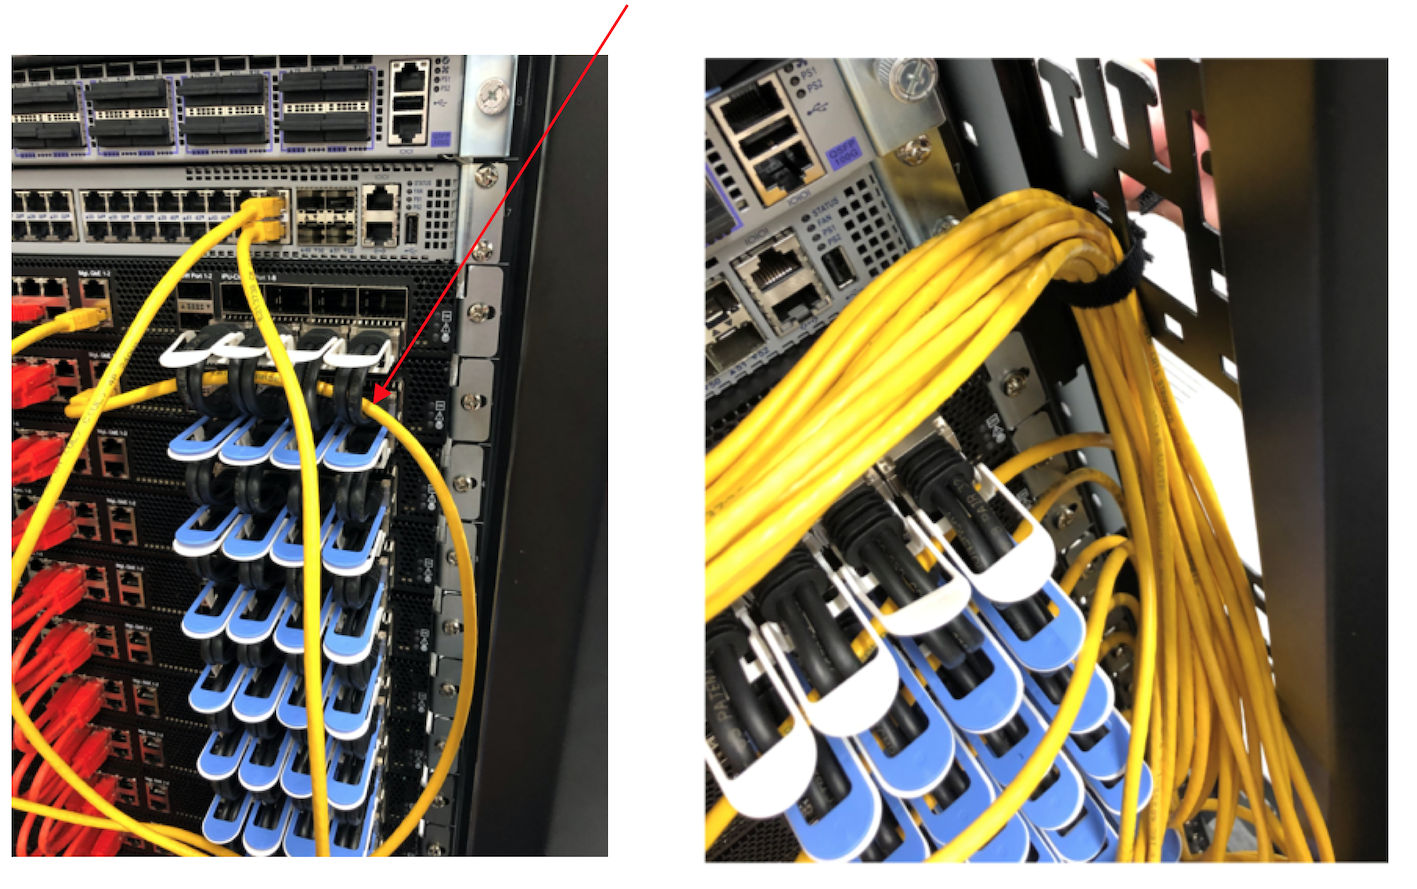 _images/BMC_wiring.png